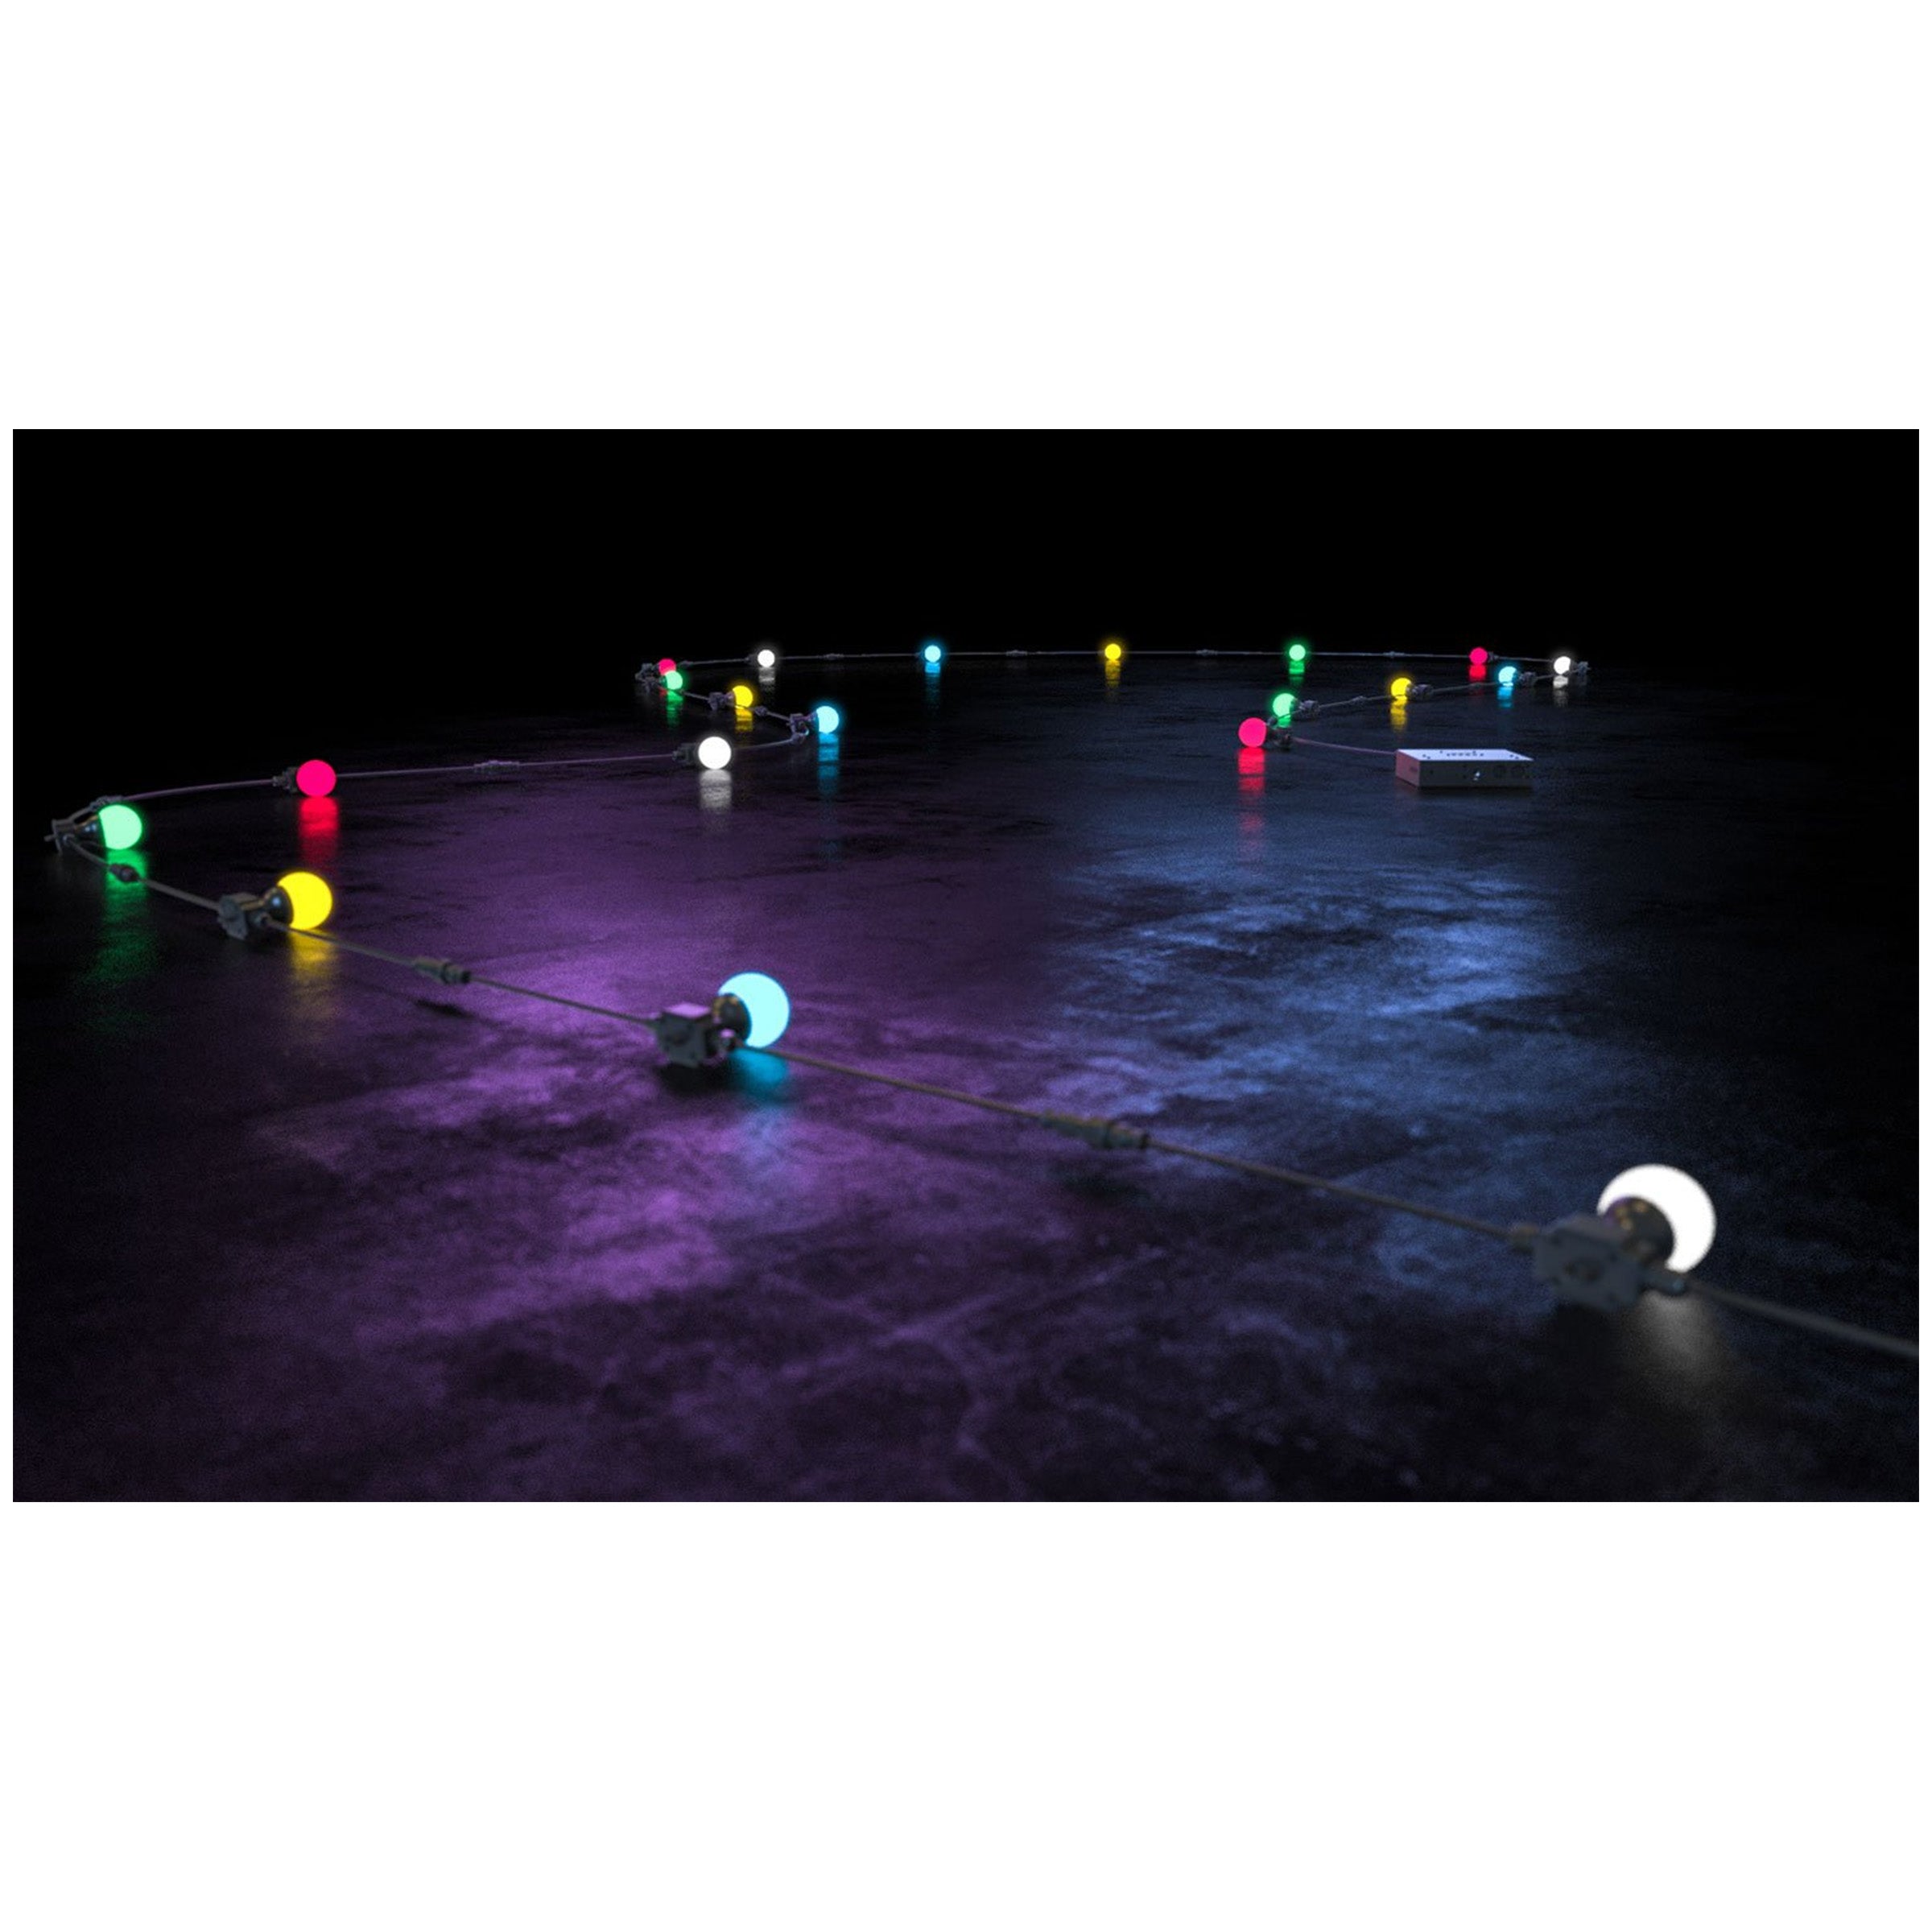 Chauvet Festoon 2 RGB Dynamic Outdoor-Rated Party Light